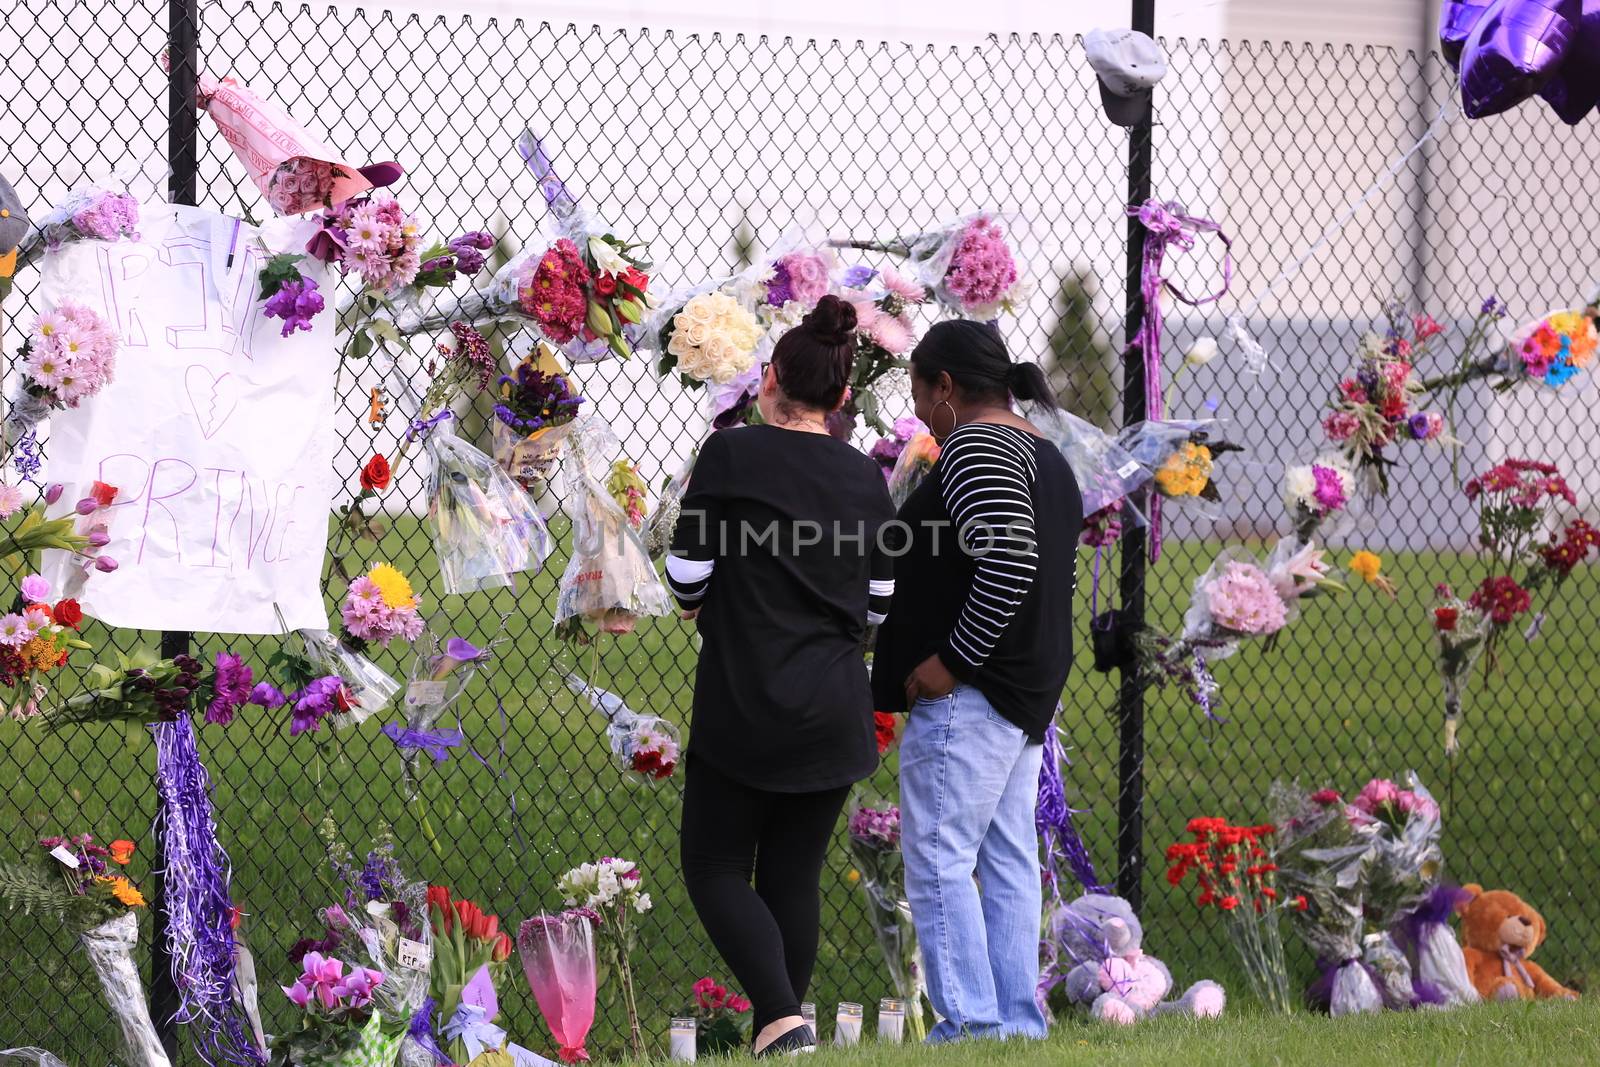 MINNESOTTA, Chanhassen: Fans pay their respects outside the Paisley Park residential compound of music legend Prince in Chanhassen, near Minneapolis, Minnesota, on April 21, 2016. Emergency personnel tried and failed to revive music legend Prince, who died April 21, 2016, at age 57, after finding him slumped unresponsive in an elevator at his Paisley Park studios in Minnesota, the local sheriff said.